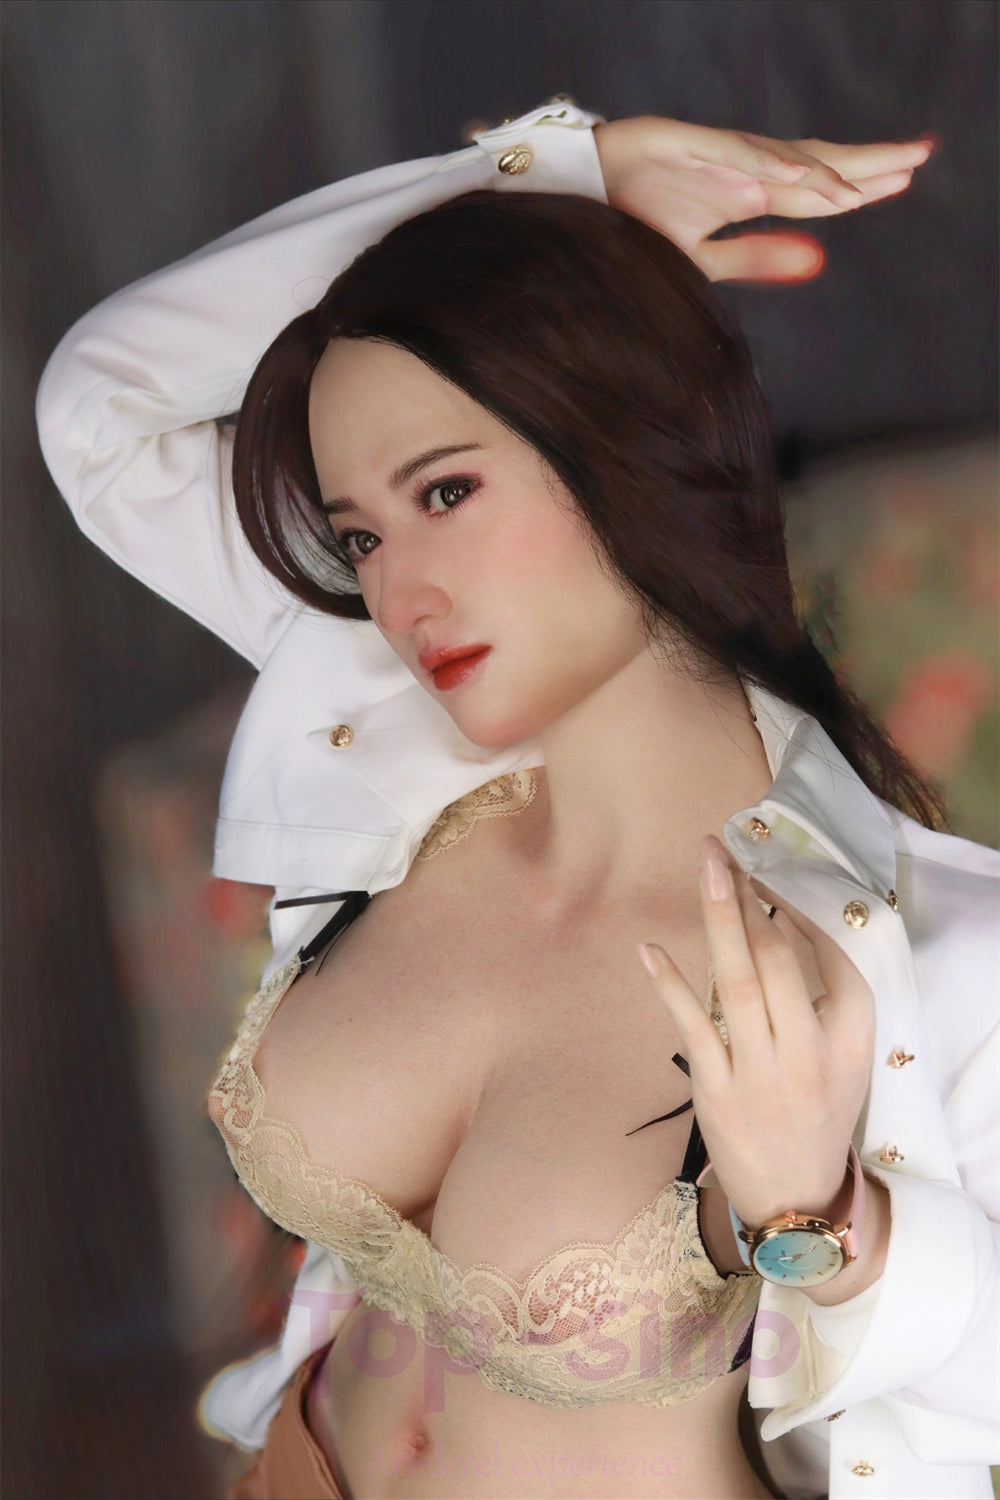 Top Sino 163 cm D Platinum Silicone - Mifei - V1 | Buy Sex Dolls at DOLLS ACTUALLY